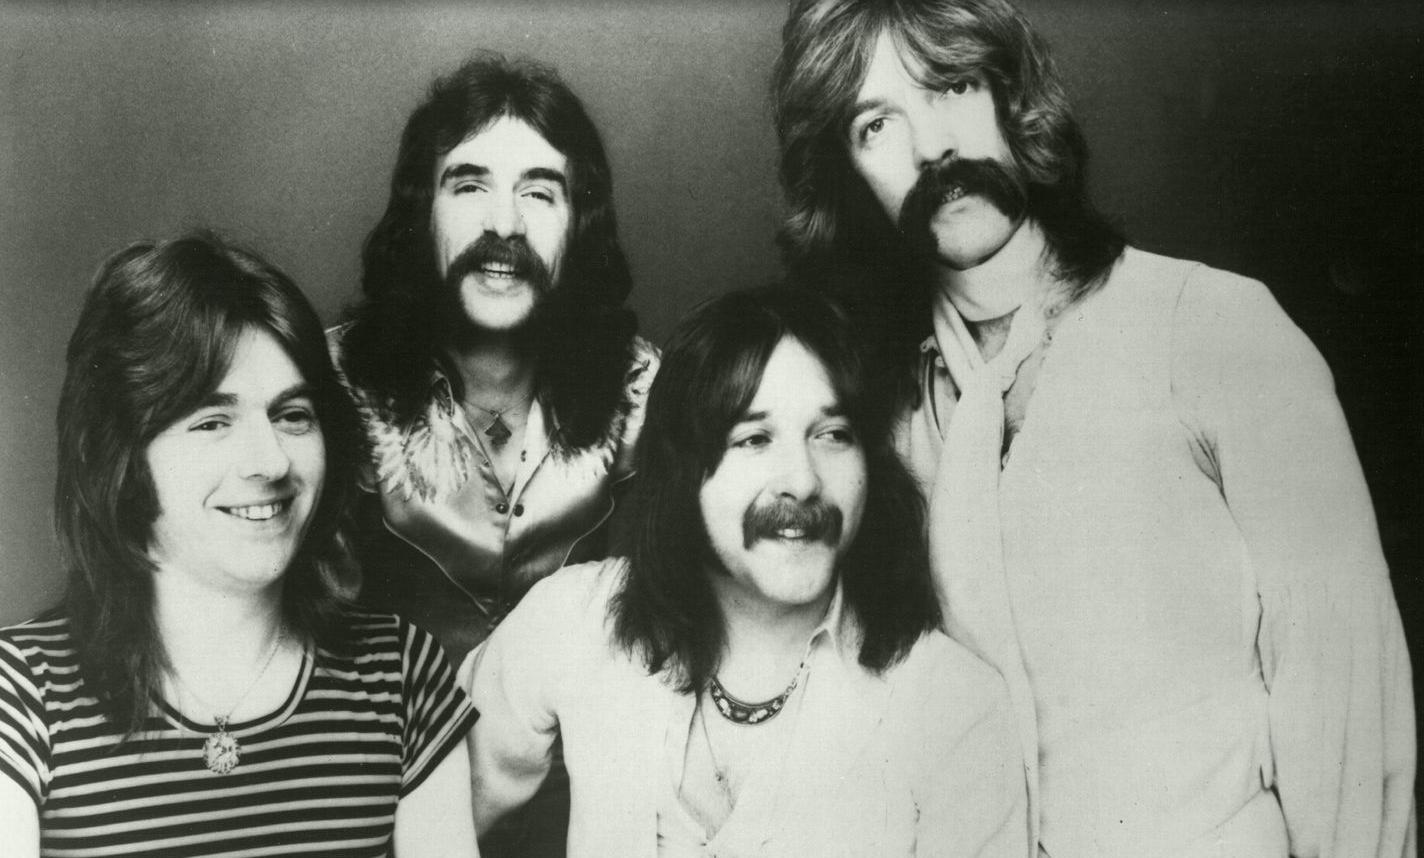 who did foghat tour with in the 70s